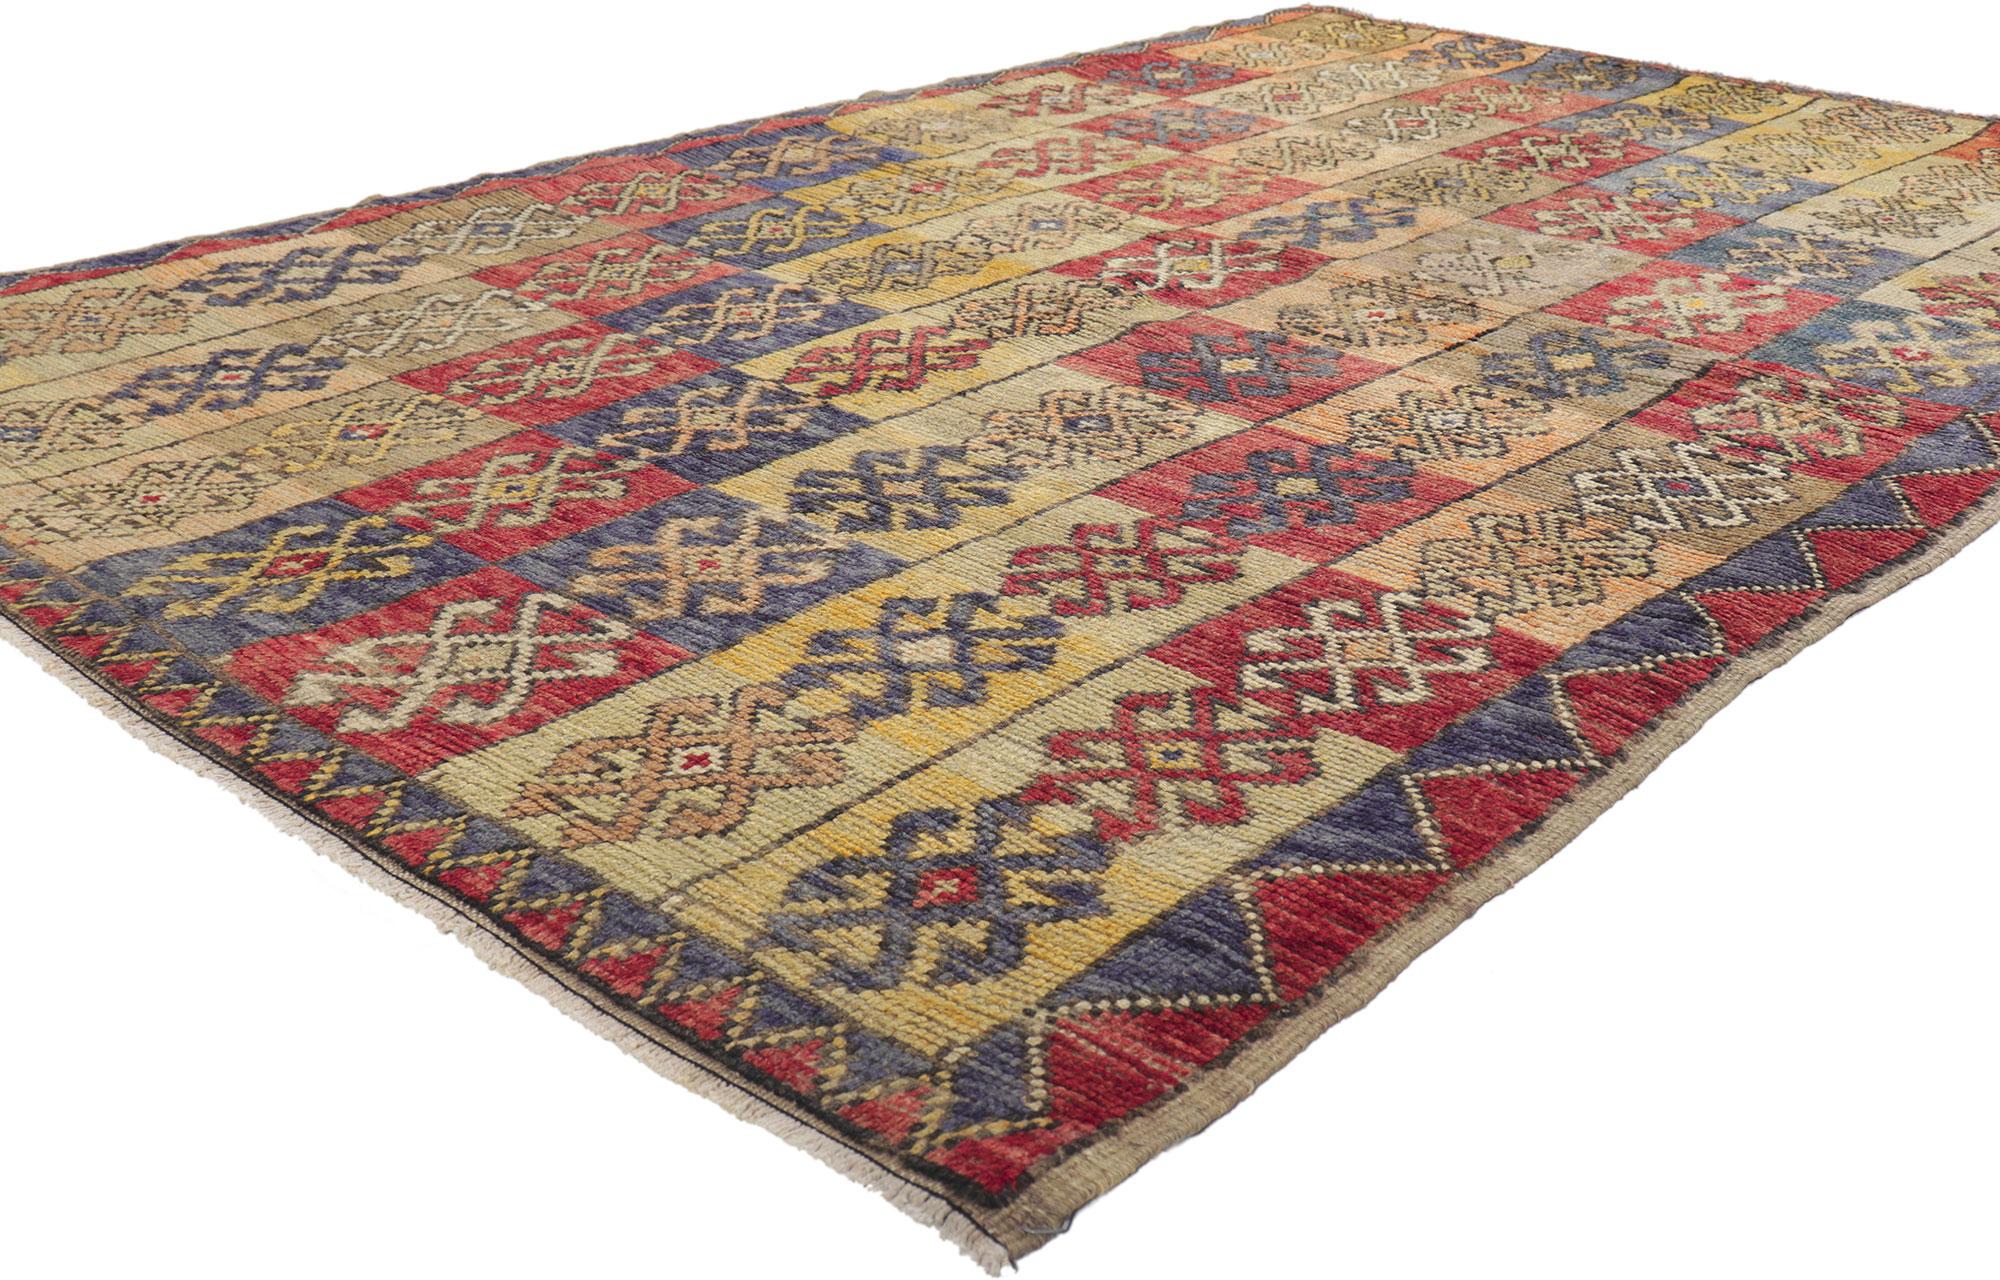 50918 Vintage Turkish Oushak with Tribal Style 05'01 X 08'00. Emanating nomadic charm with incredible detail and texture, this hand knotted wool vintage Turkish Oushak rug is a captivating vision of woven beauty. The eye-catching compartmental